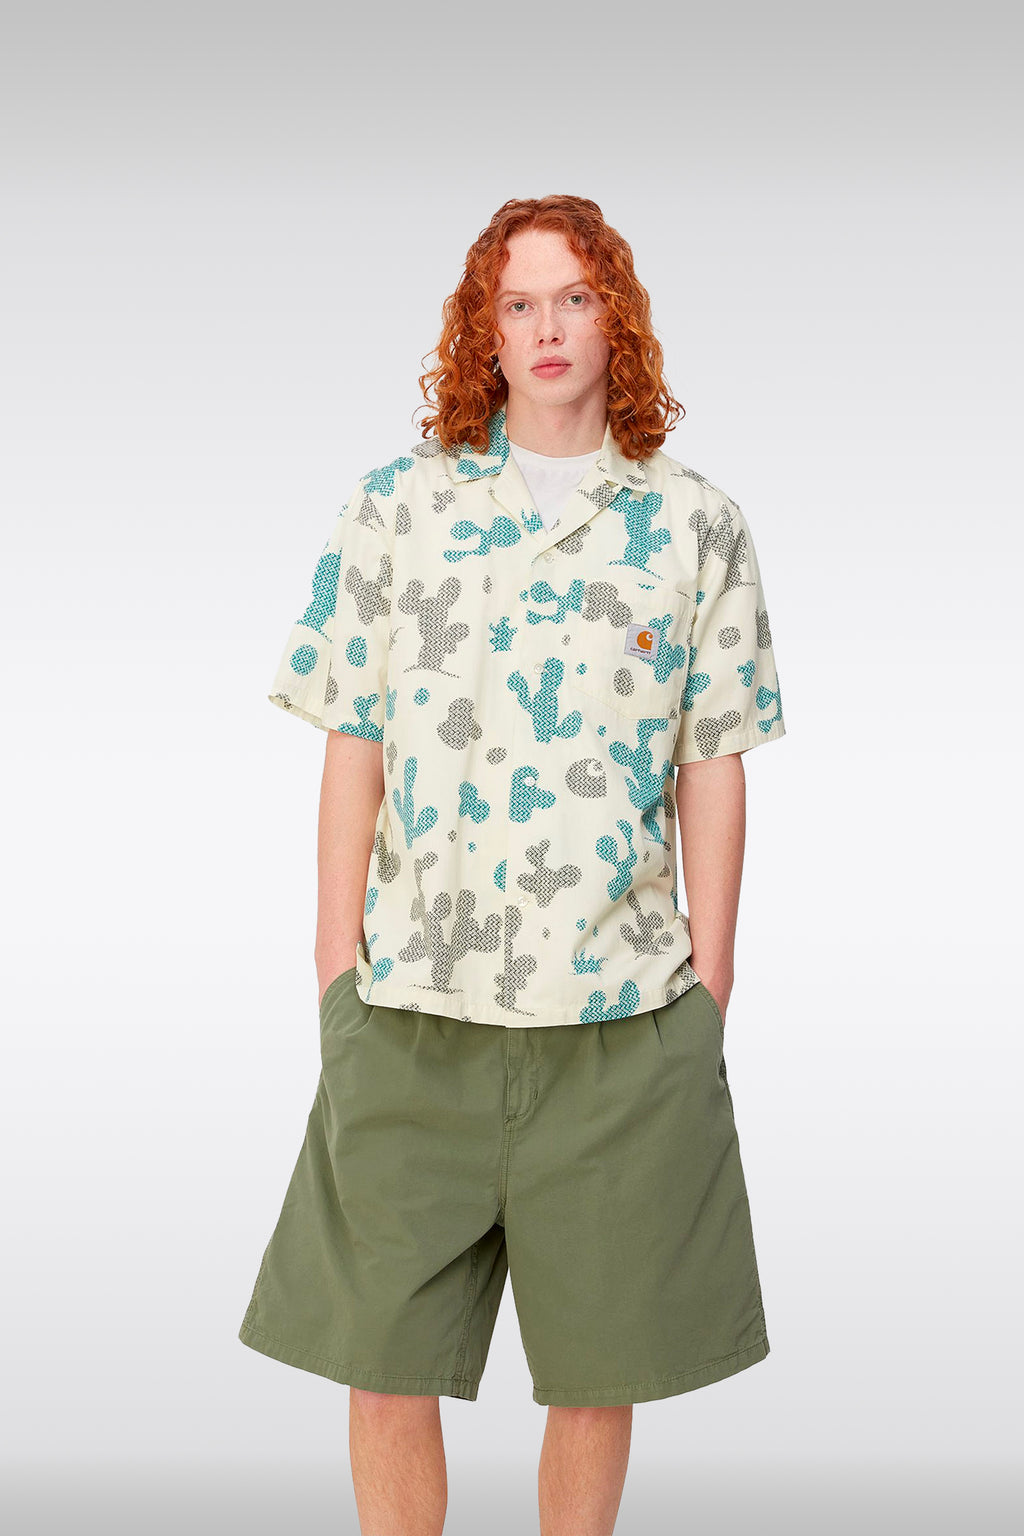 alt-image__Off-white-cotton-bowling-shirt-with-cactus-print---S/S-Opus-Shirt